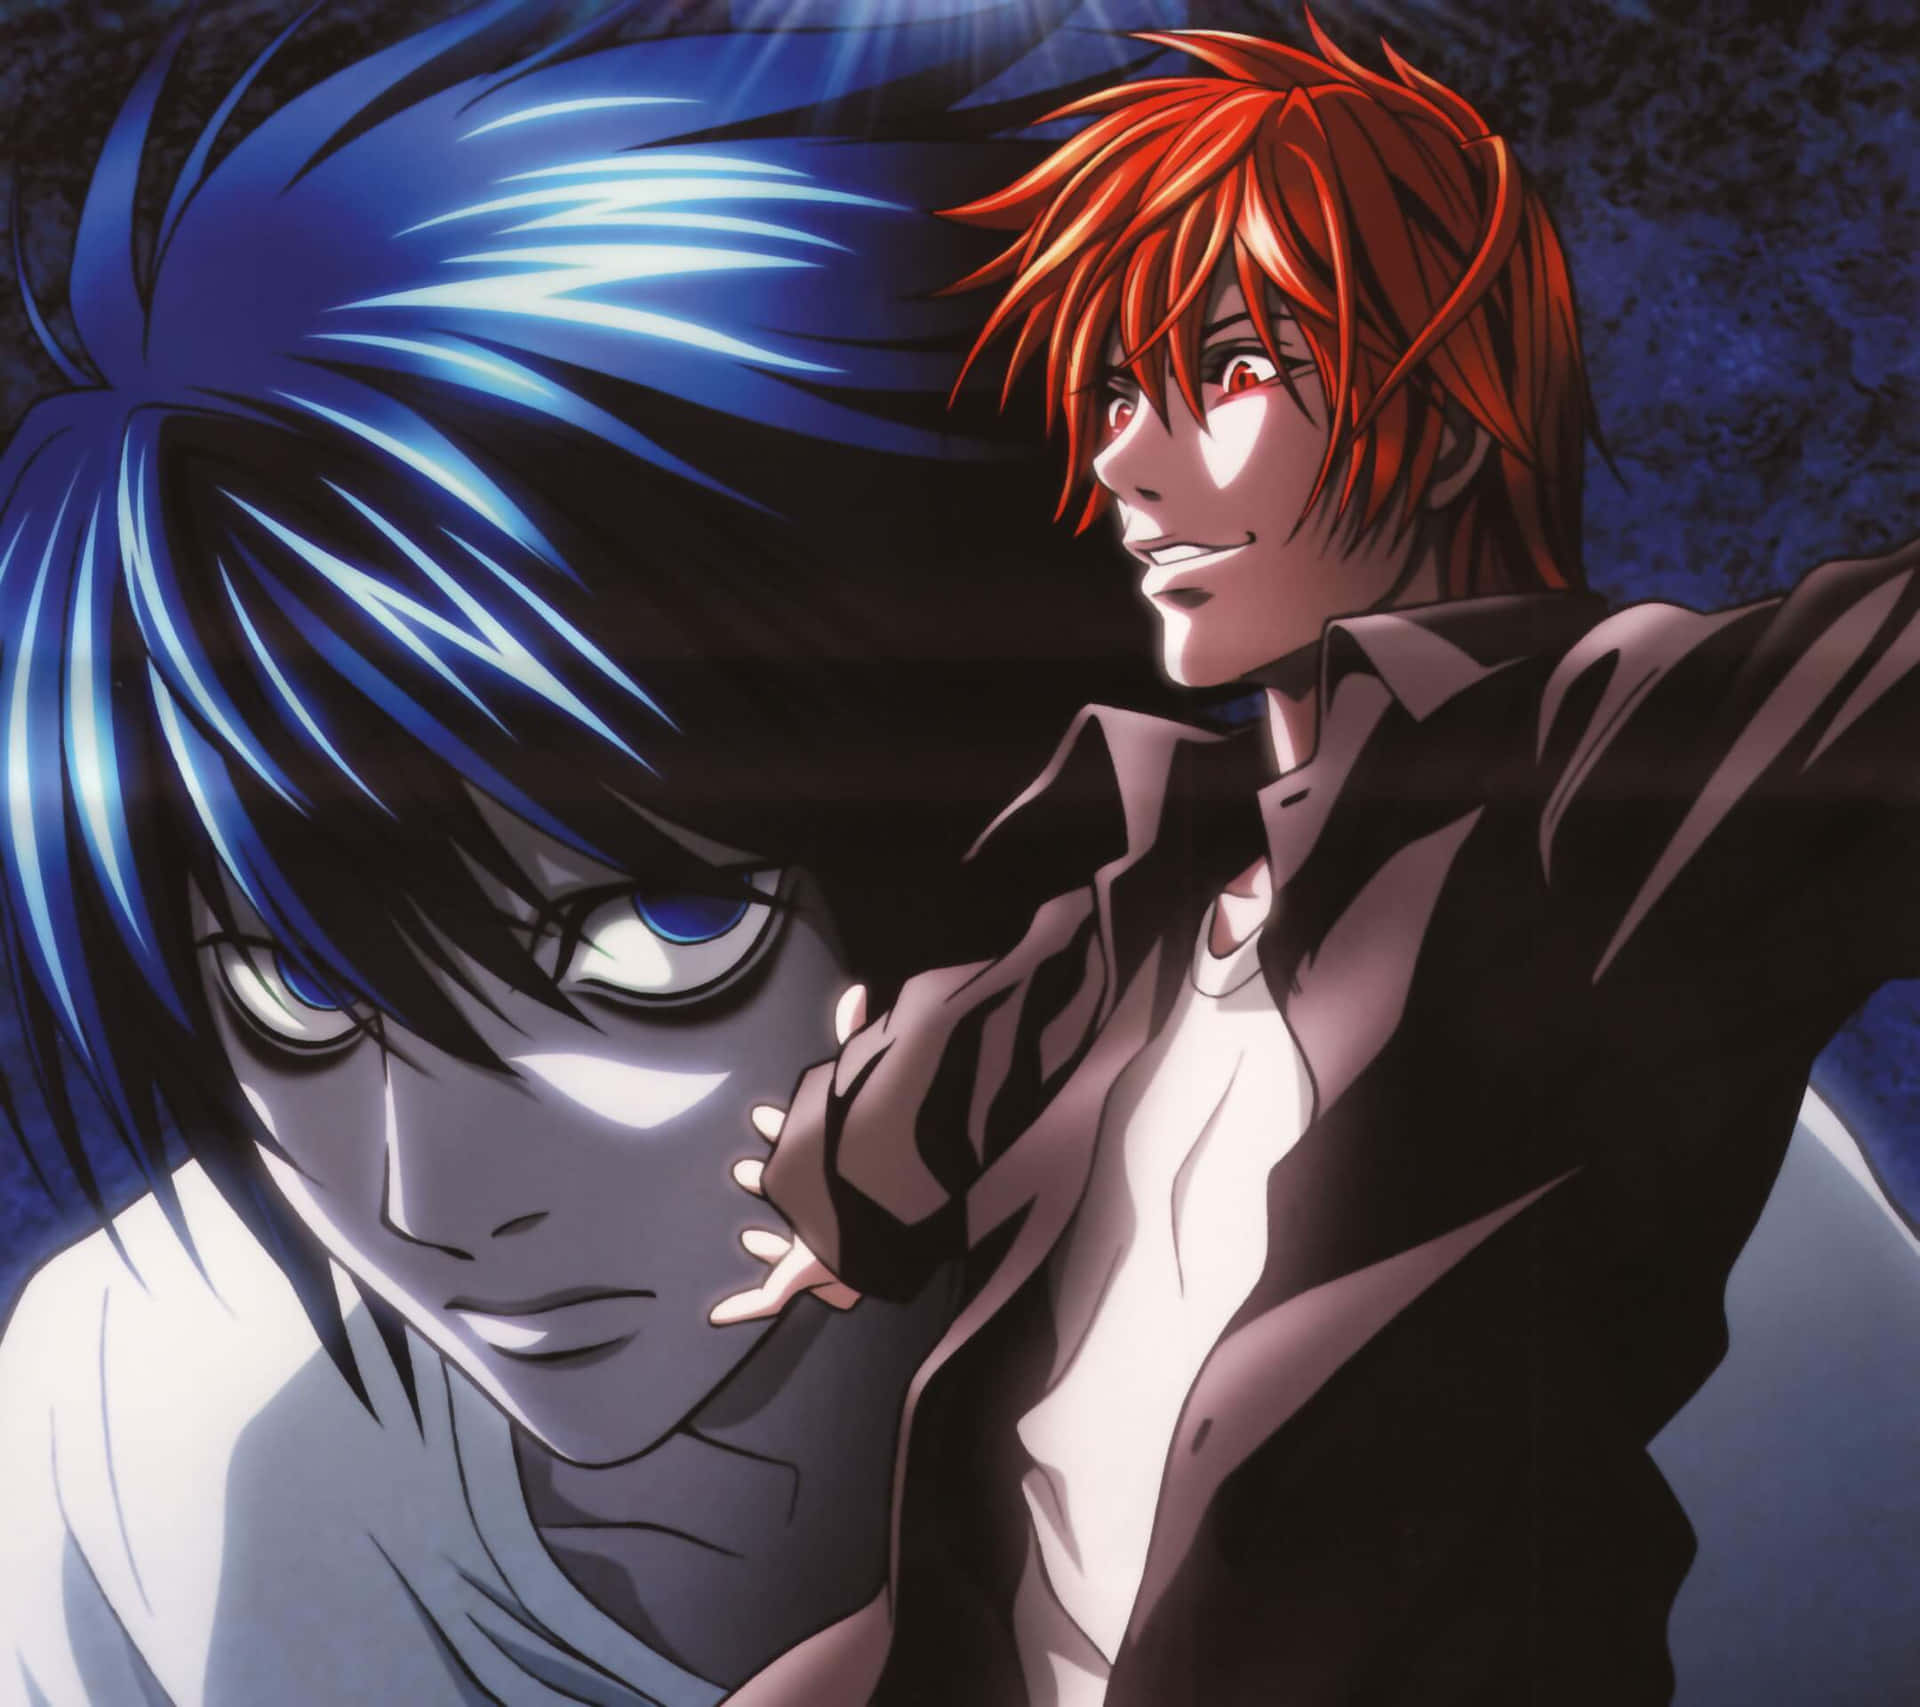 Light Yagami taking control of the world